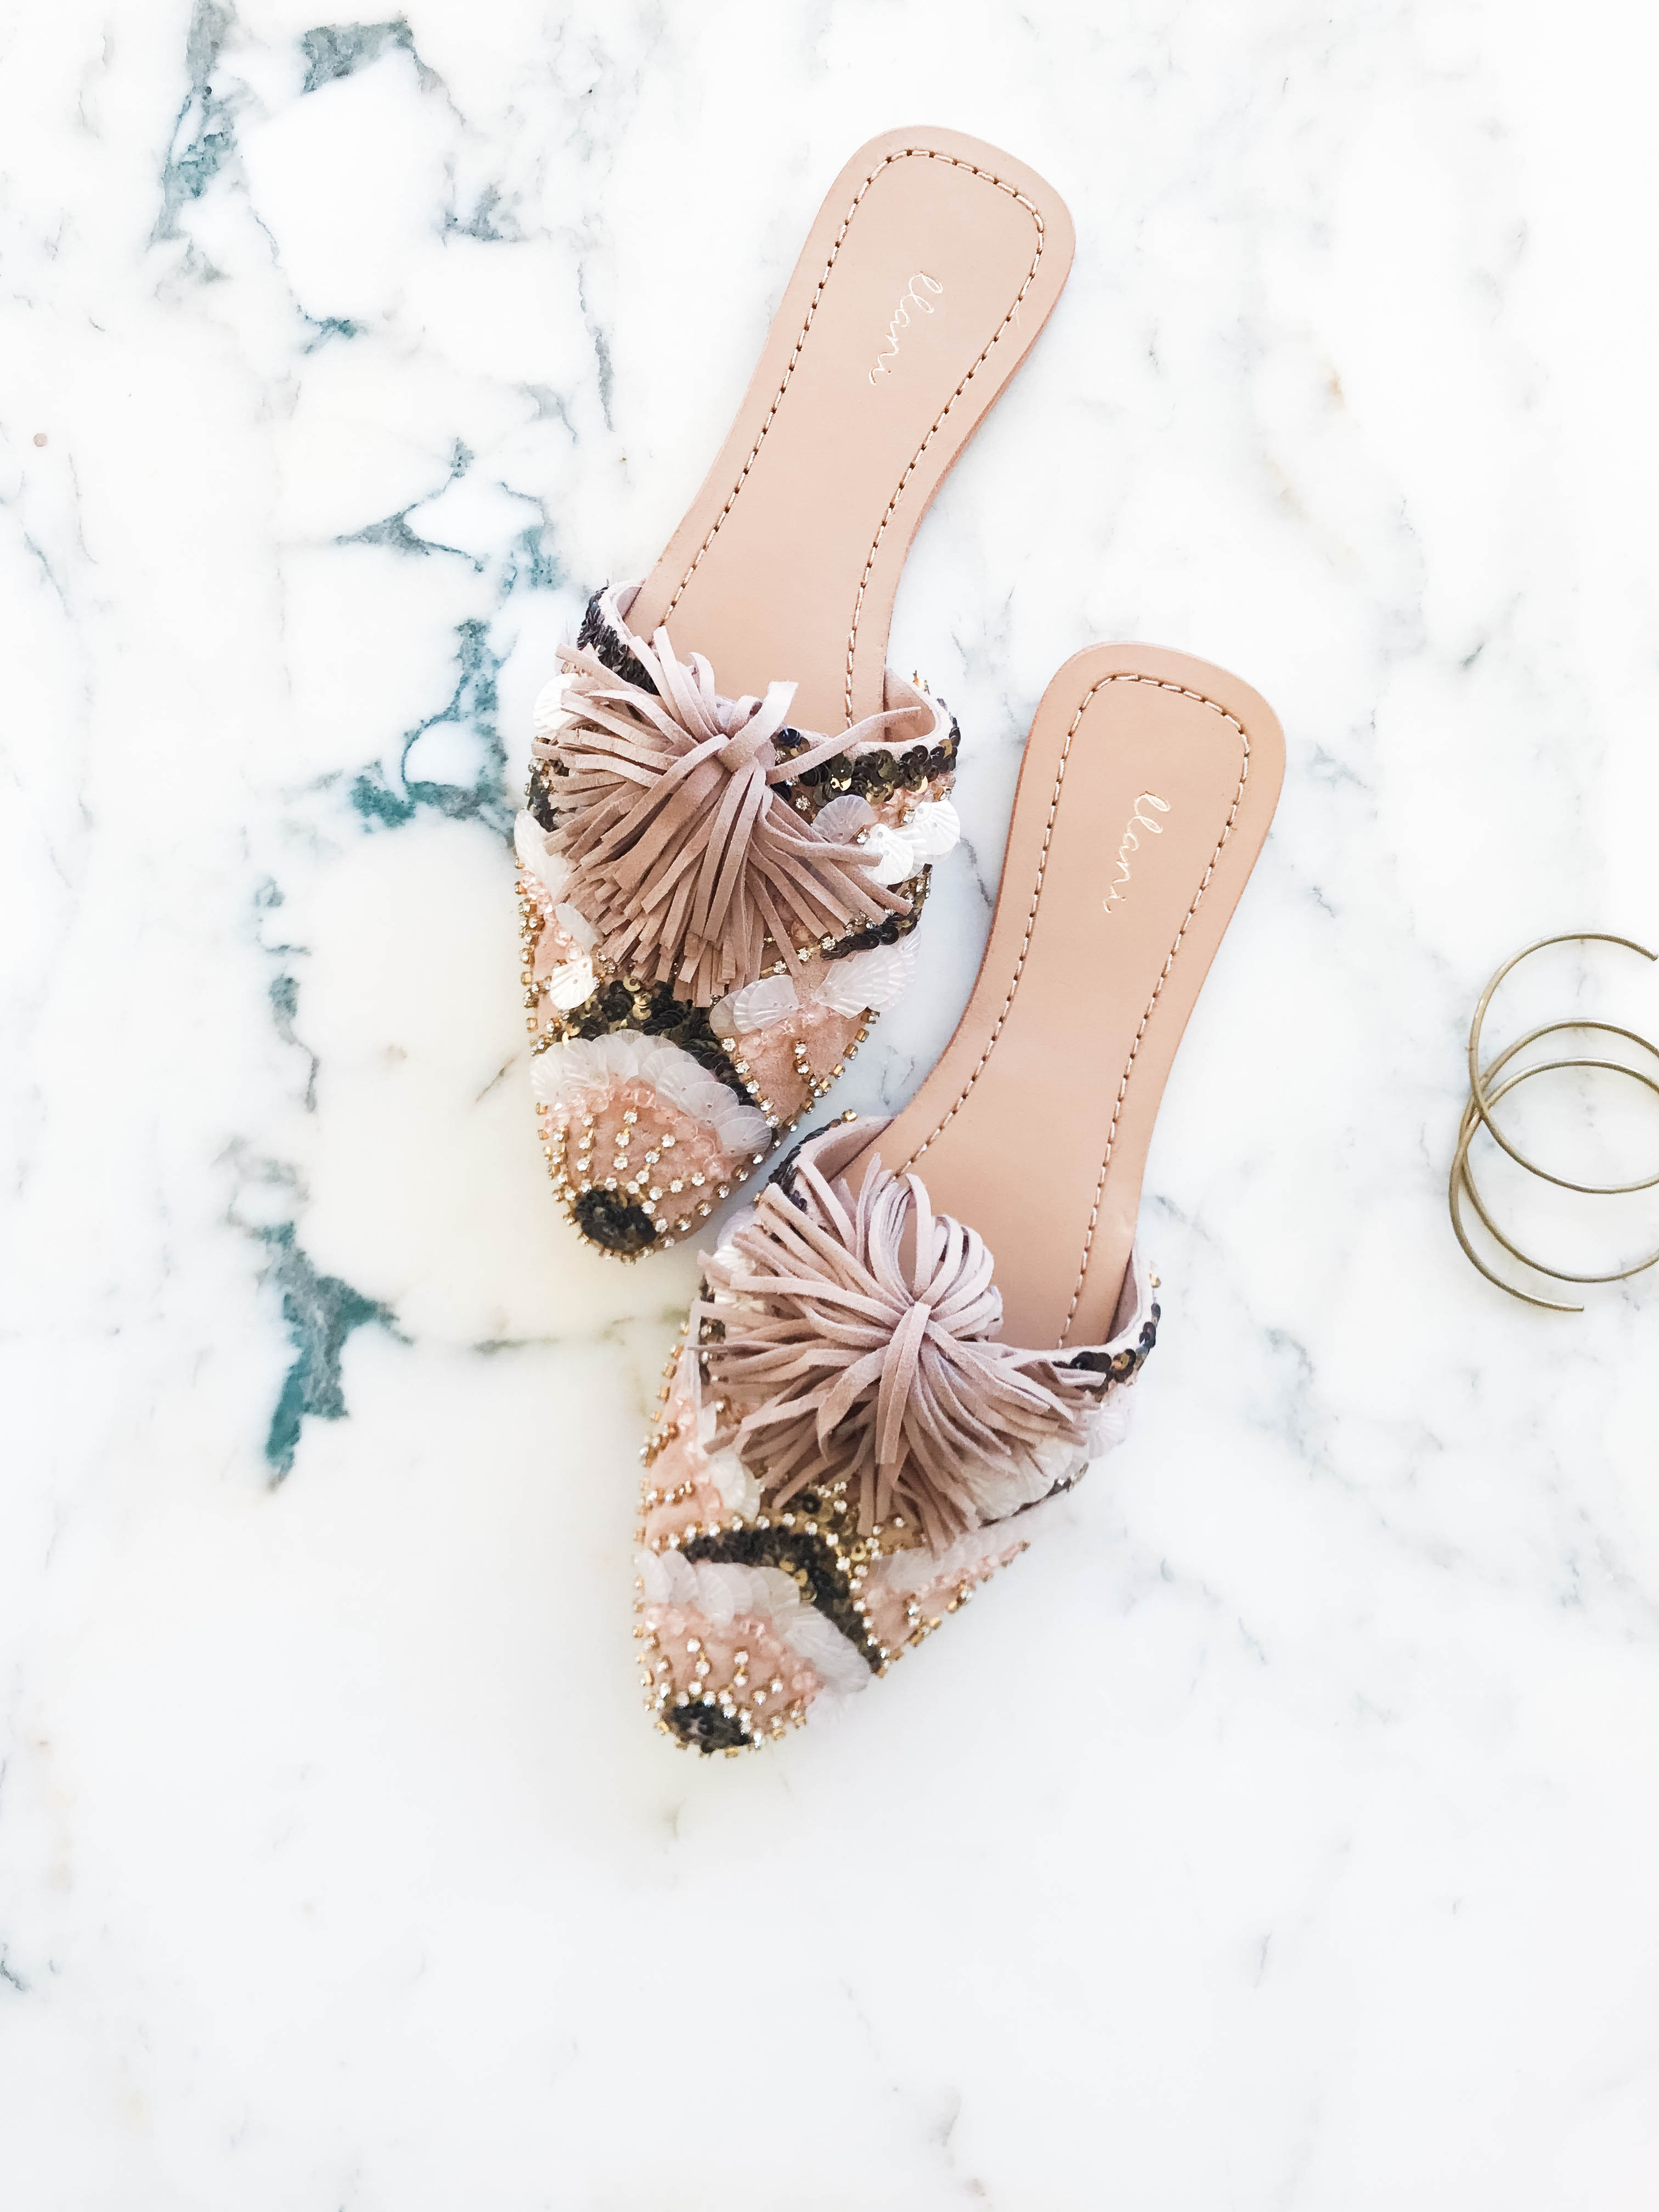 The perfect blush pink embellished slides for a cozy, polished look via b is for bonnie design featuring Llani Shoes